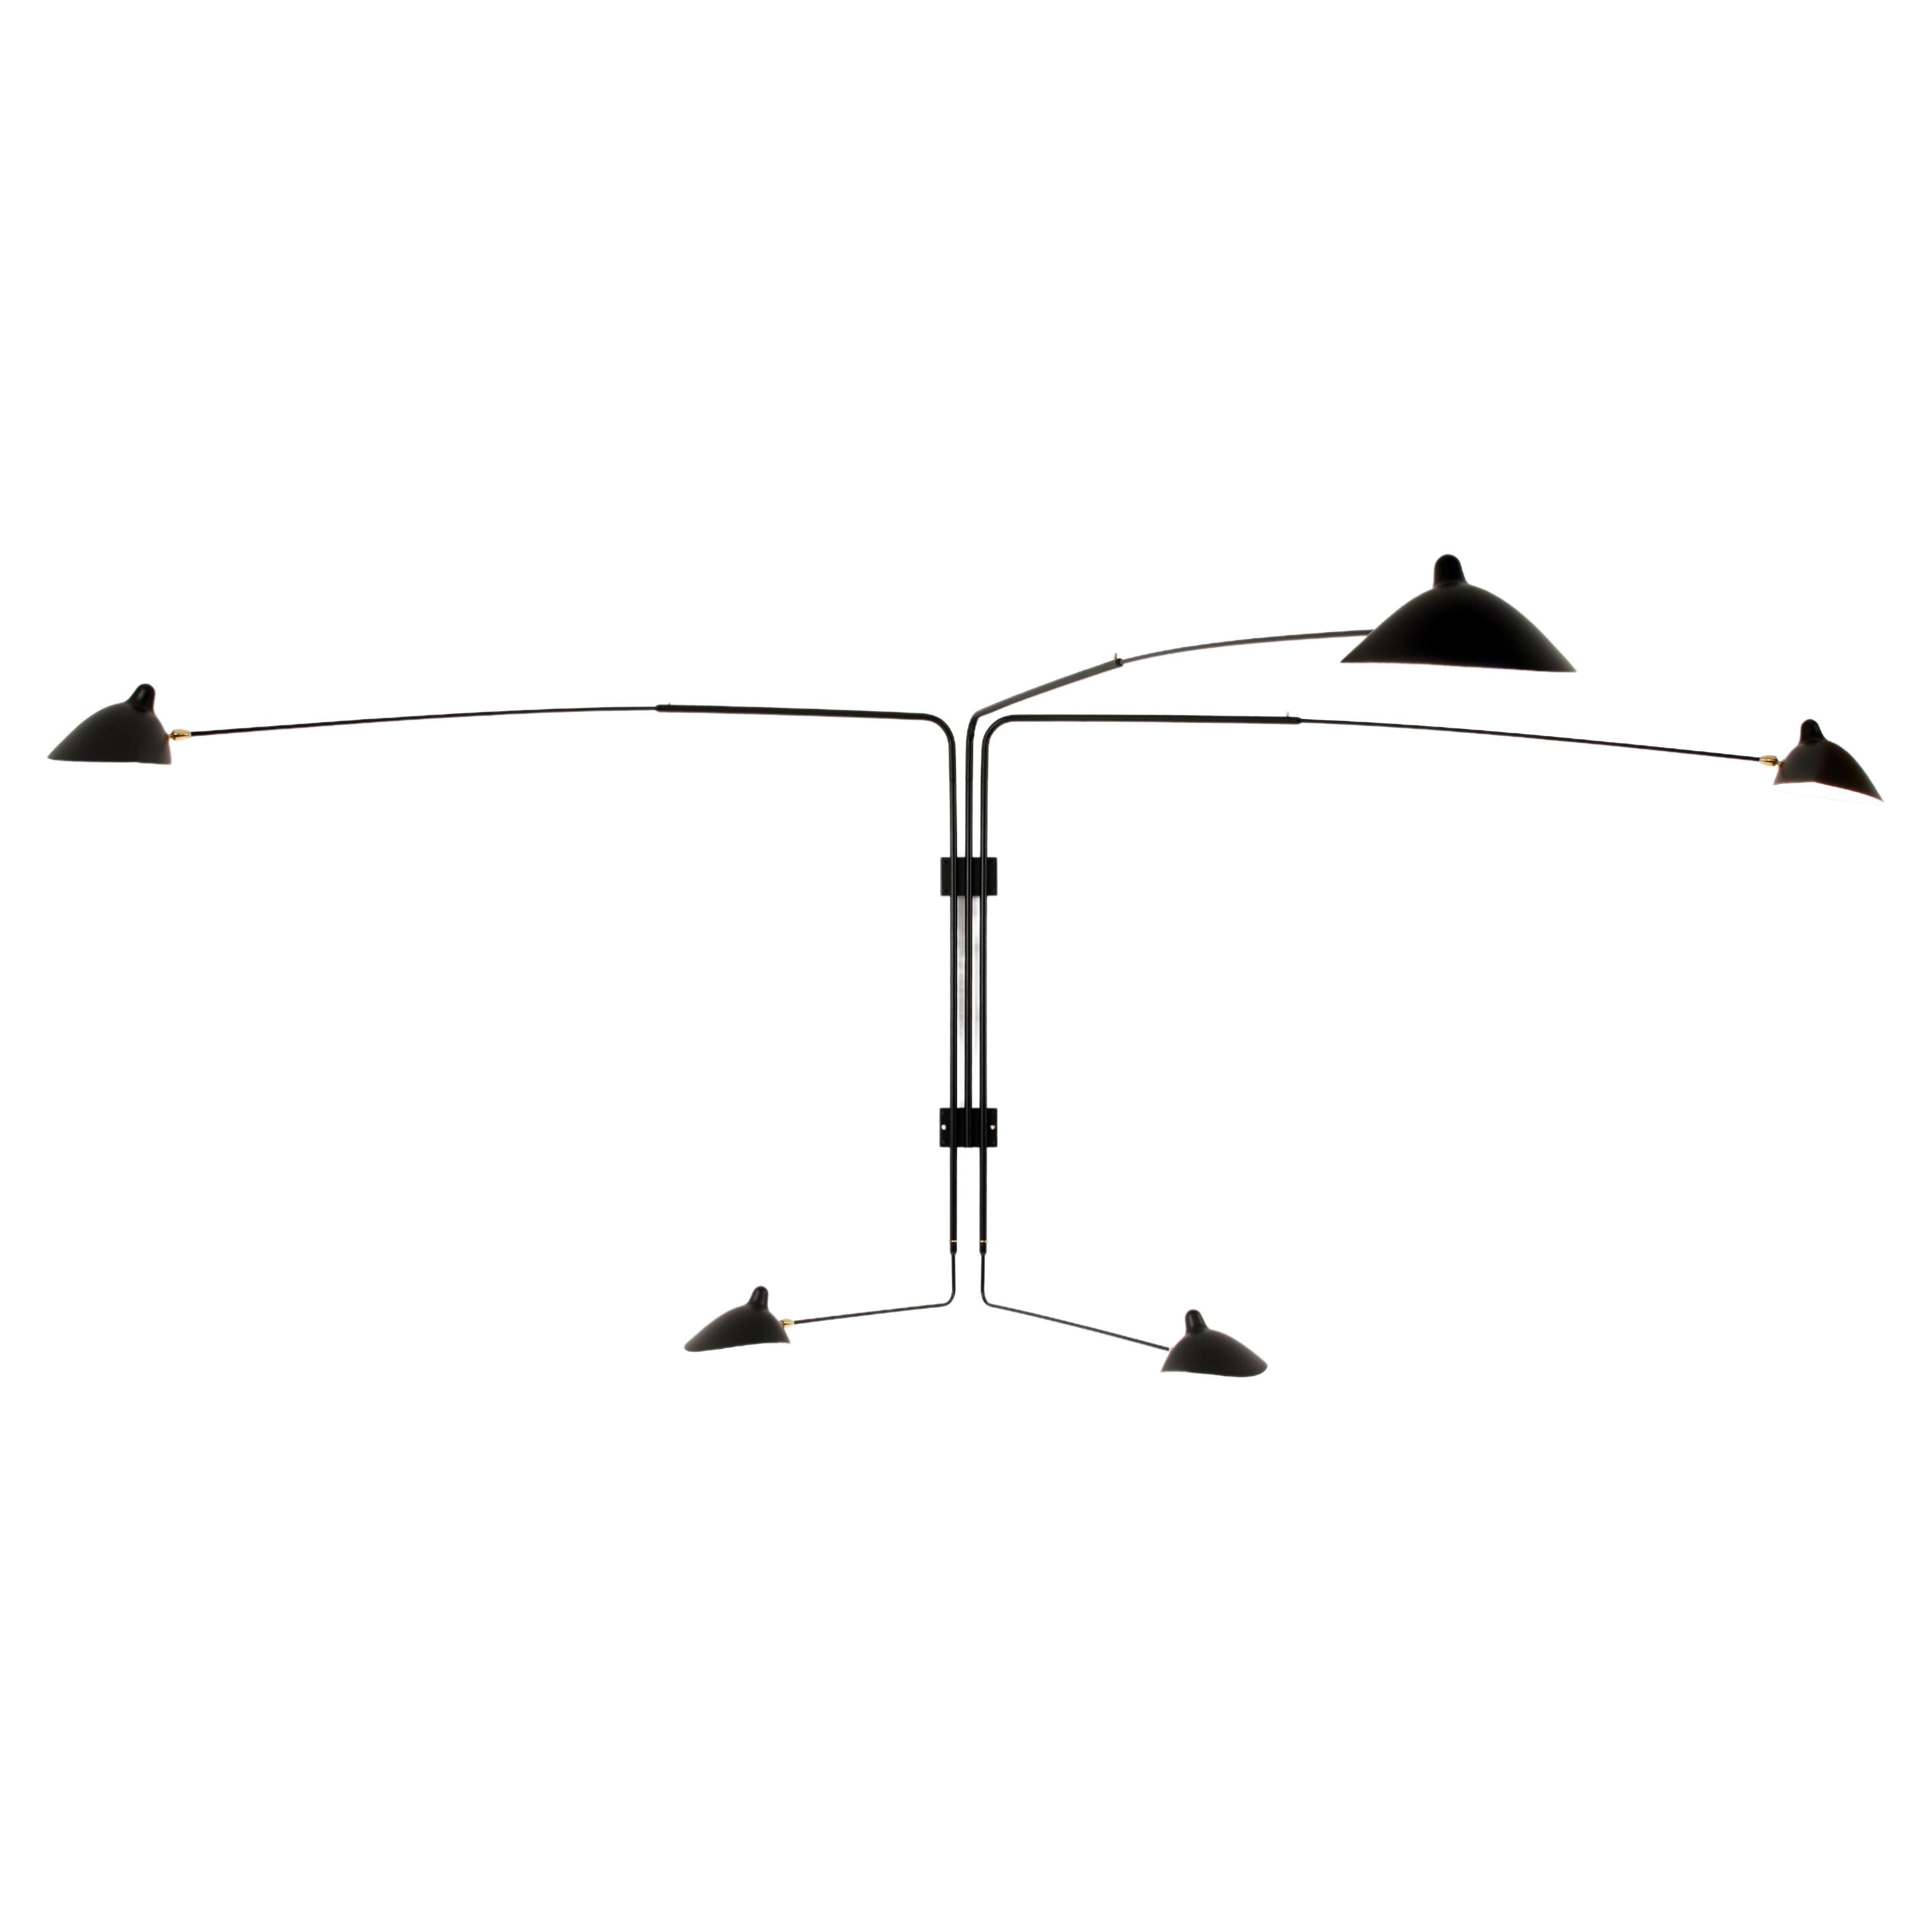 Sconce 5 Rotating Straight Arms by Serge Mouille